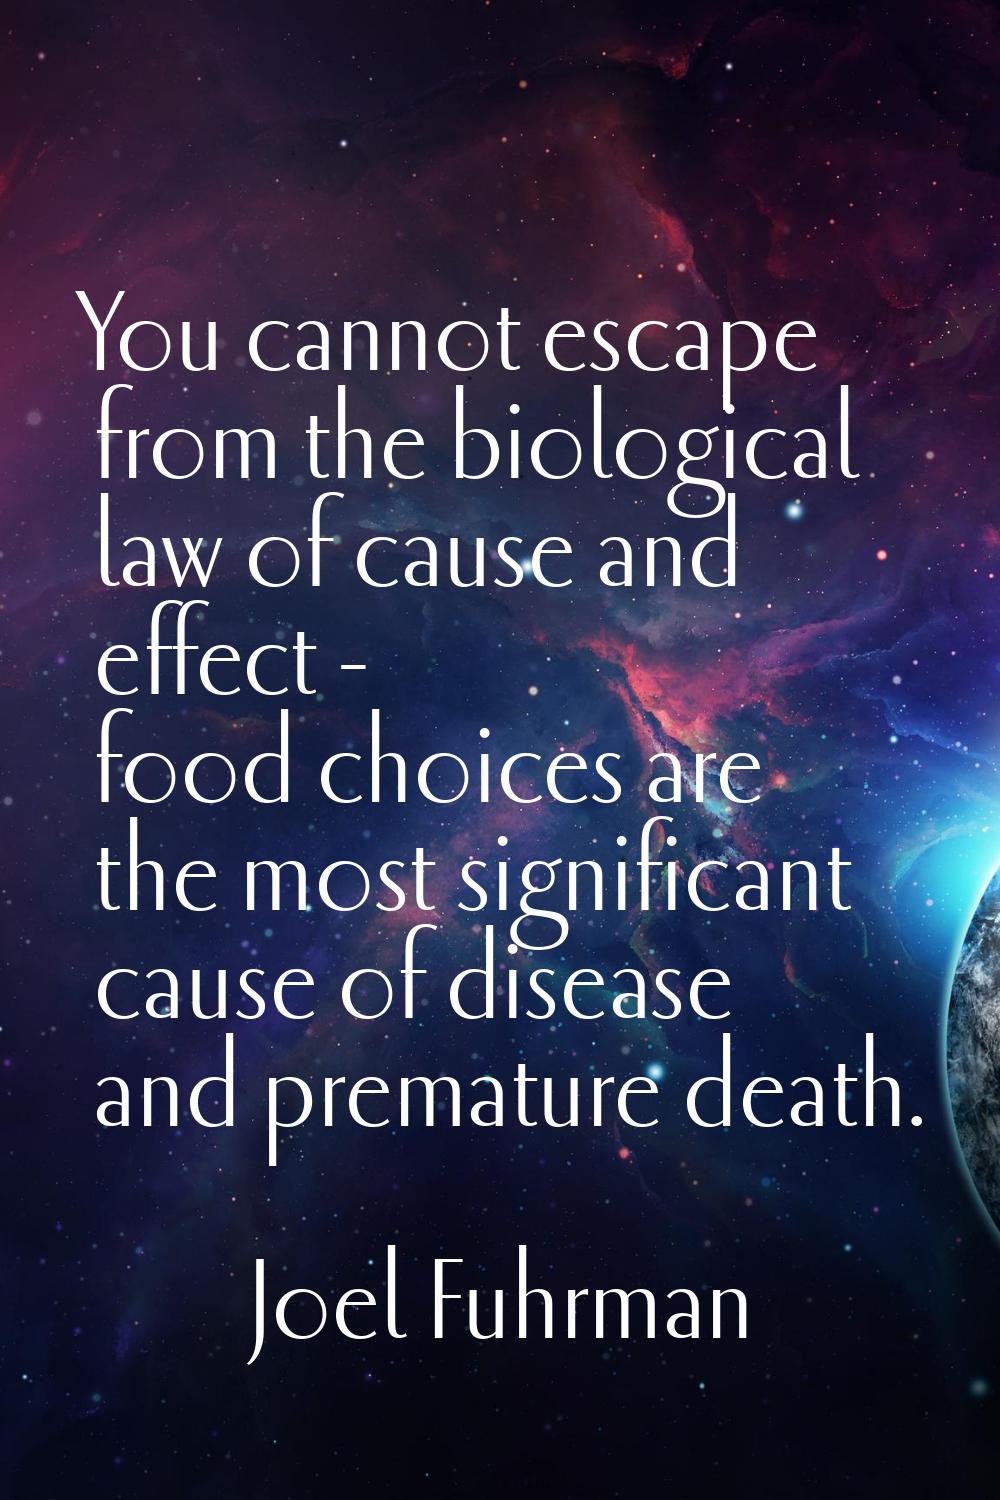 You cannot escape from the biological law of cause and effect - food choices are the most significa